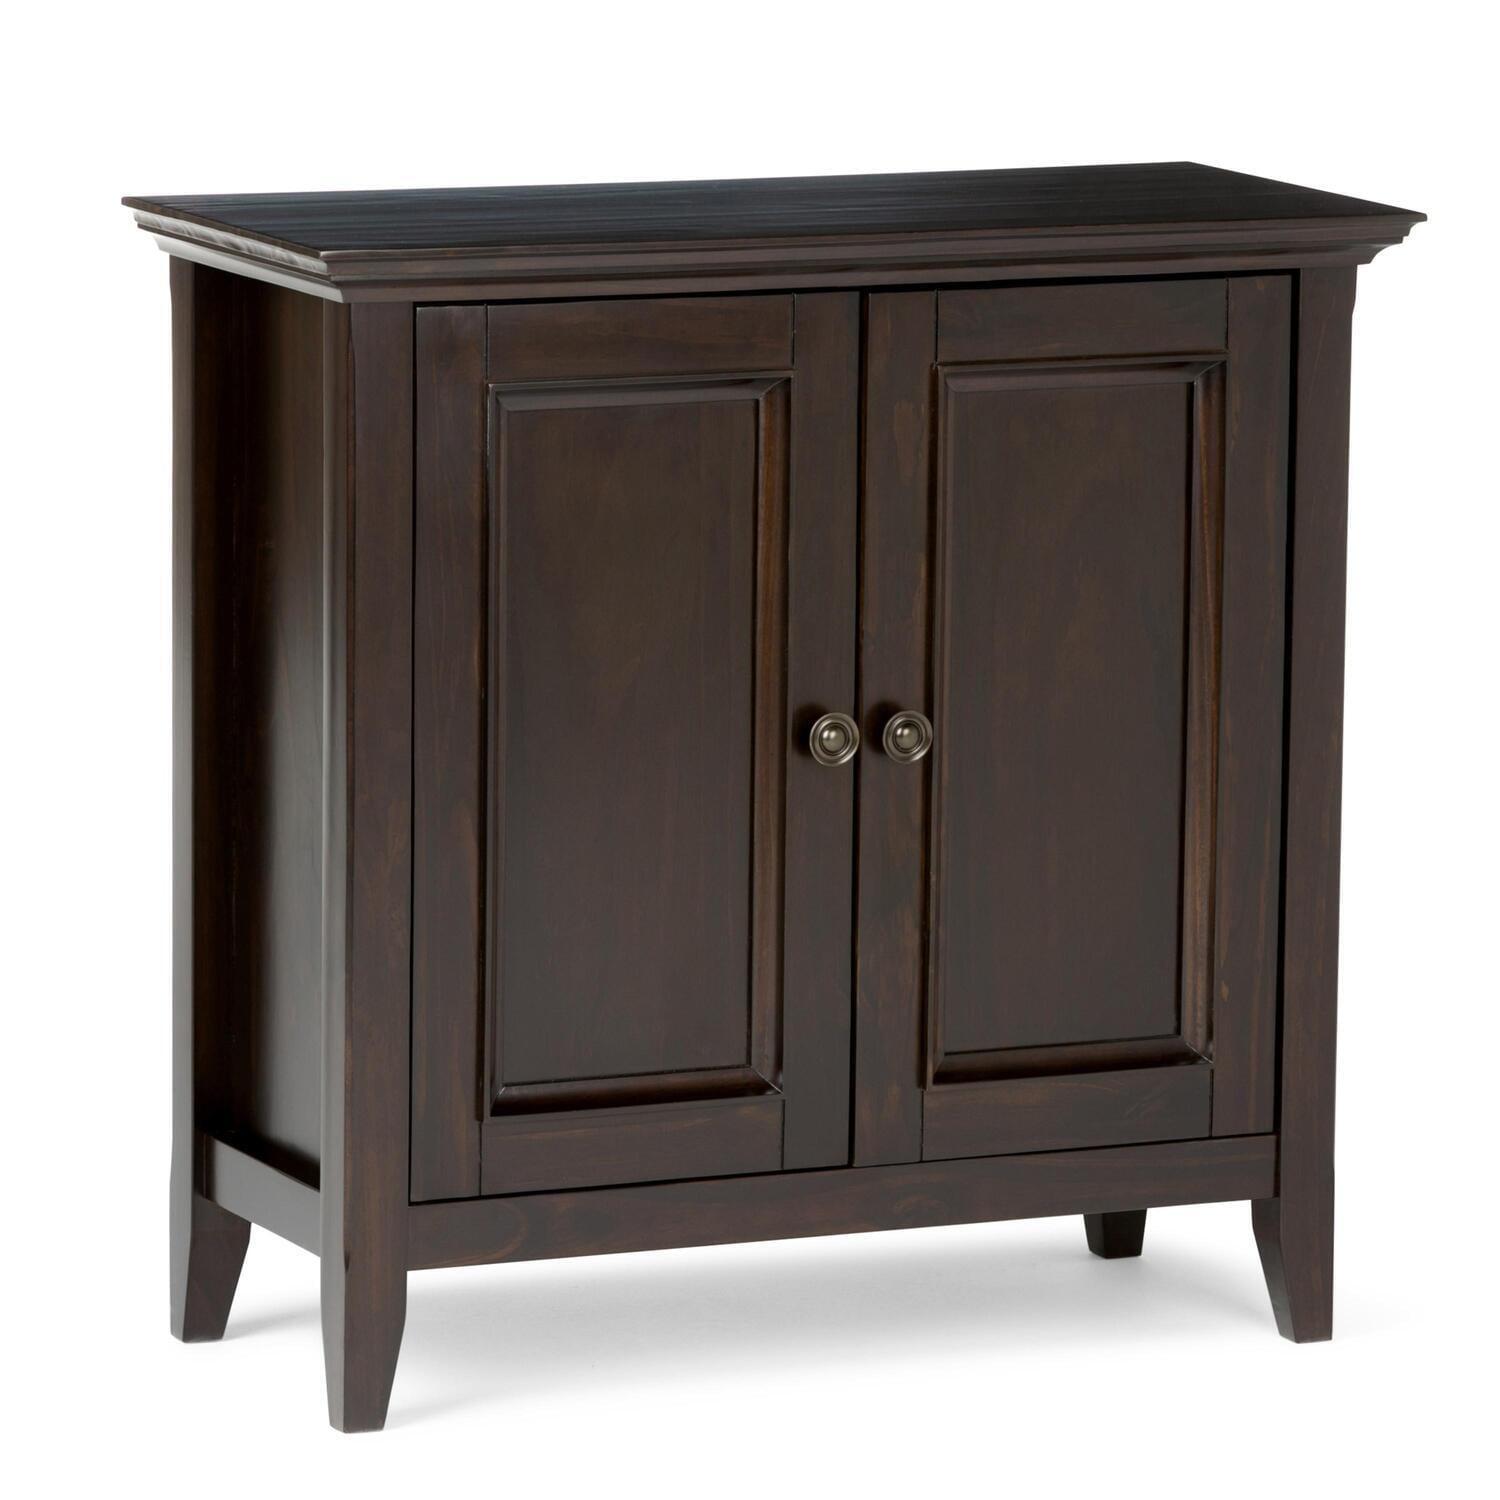 Hickory Brown Solid Wood Low Storage Cabinet with Adjustable Shelving